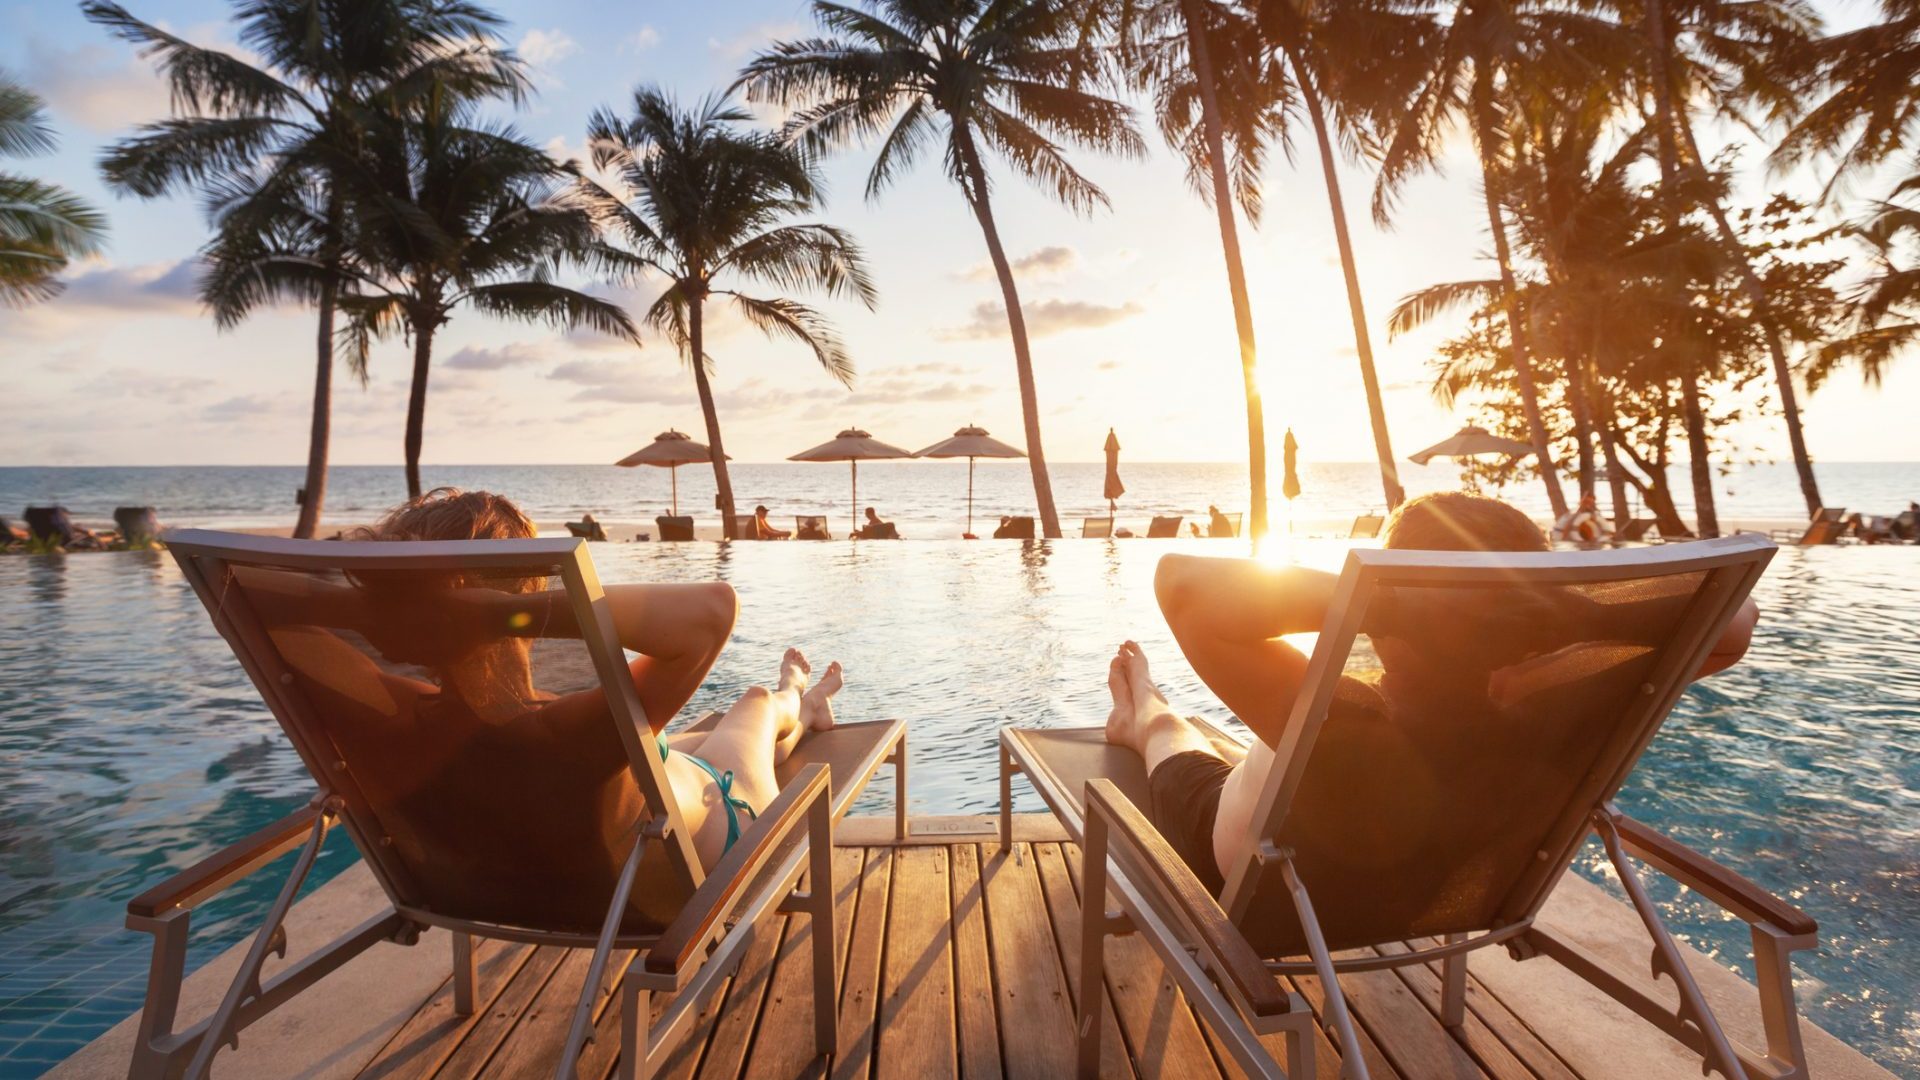 <p><span>“Traveling with friends who have different budgets can cause you to spend more on a vacation than you can afford,” said Annette Harris, owner of </span><a rel="noopener" href="http://www.harriswealthcoach.com"><span>Harris Financial Coaching</span></a><span>. “It also leads individuals to pay for their vacation using credit cards. It's not always wrong to use a credit card to pay for a vacation if you can afford it, but it may cause you to pay more than the vacation is worth when interest is considered. Purchases such as food, drinks and souvenirs can add up, and if you try to keep up with your friends, you can end up breaking the bank.”</span></p> <p><span>To remedy this issue, Harris suggests planning for vacations at least six months to a year in advance so that you can establish a vacation budget. </span></p> <p><em><strong>See: <a href="https://www.gobankingrates.com/money/financial-planning/old-school-money-advice-shouldnt-follow-anymore/?utm_campaign=1113140&utm_source=msn.com&utm_content=6&utm_medium=rss">Old-School Money Advice You Shouldn’t Follow Anymore</a></strong></em></p>